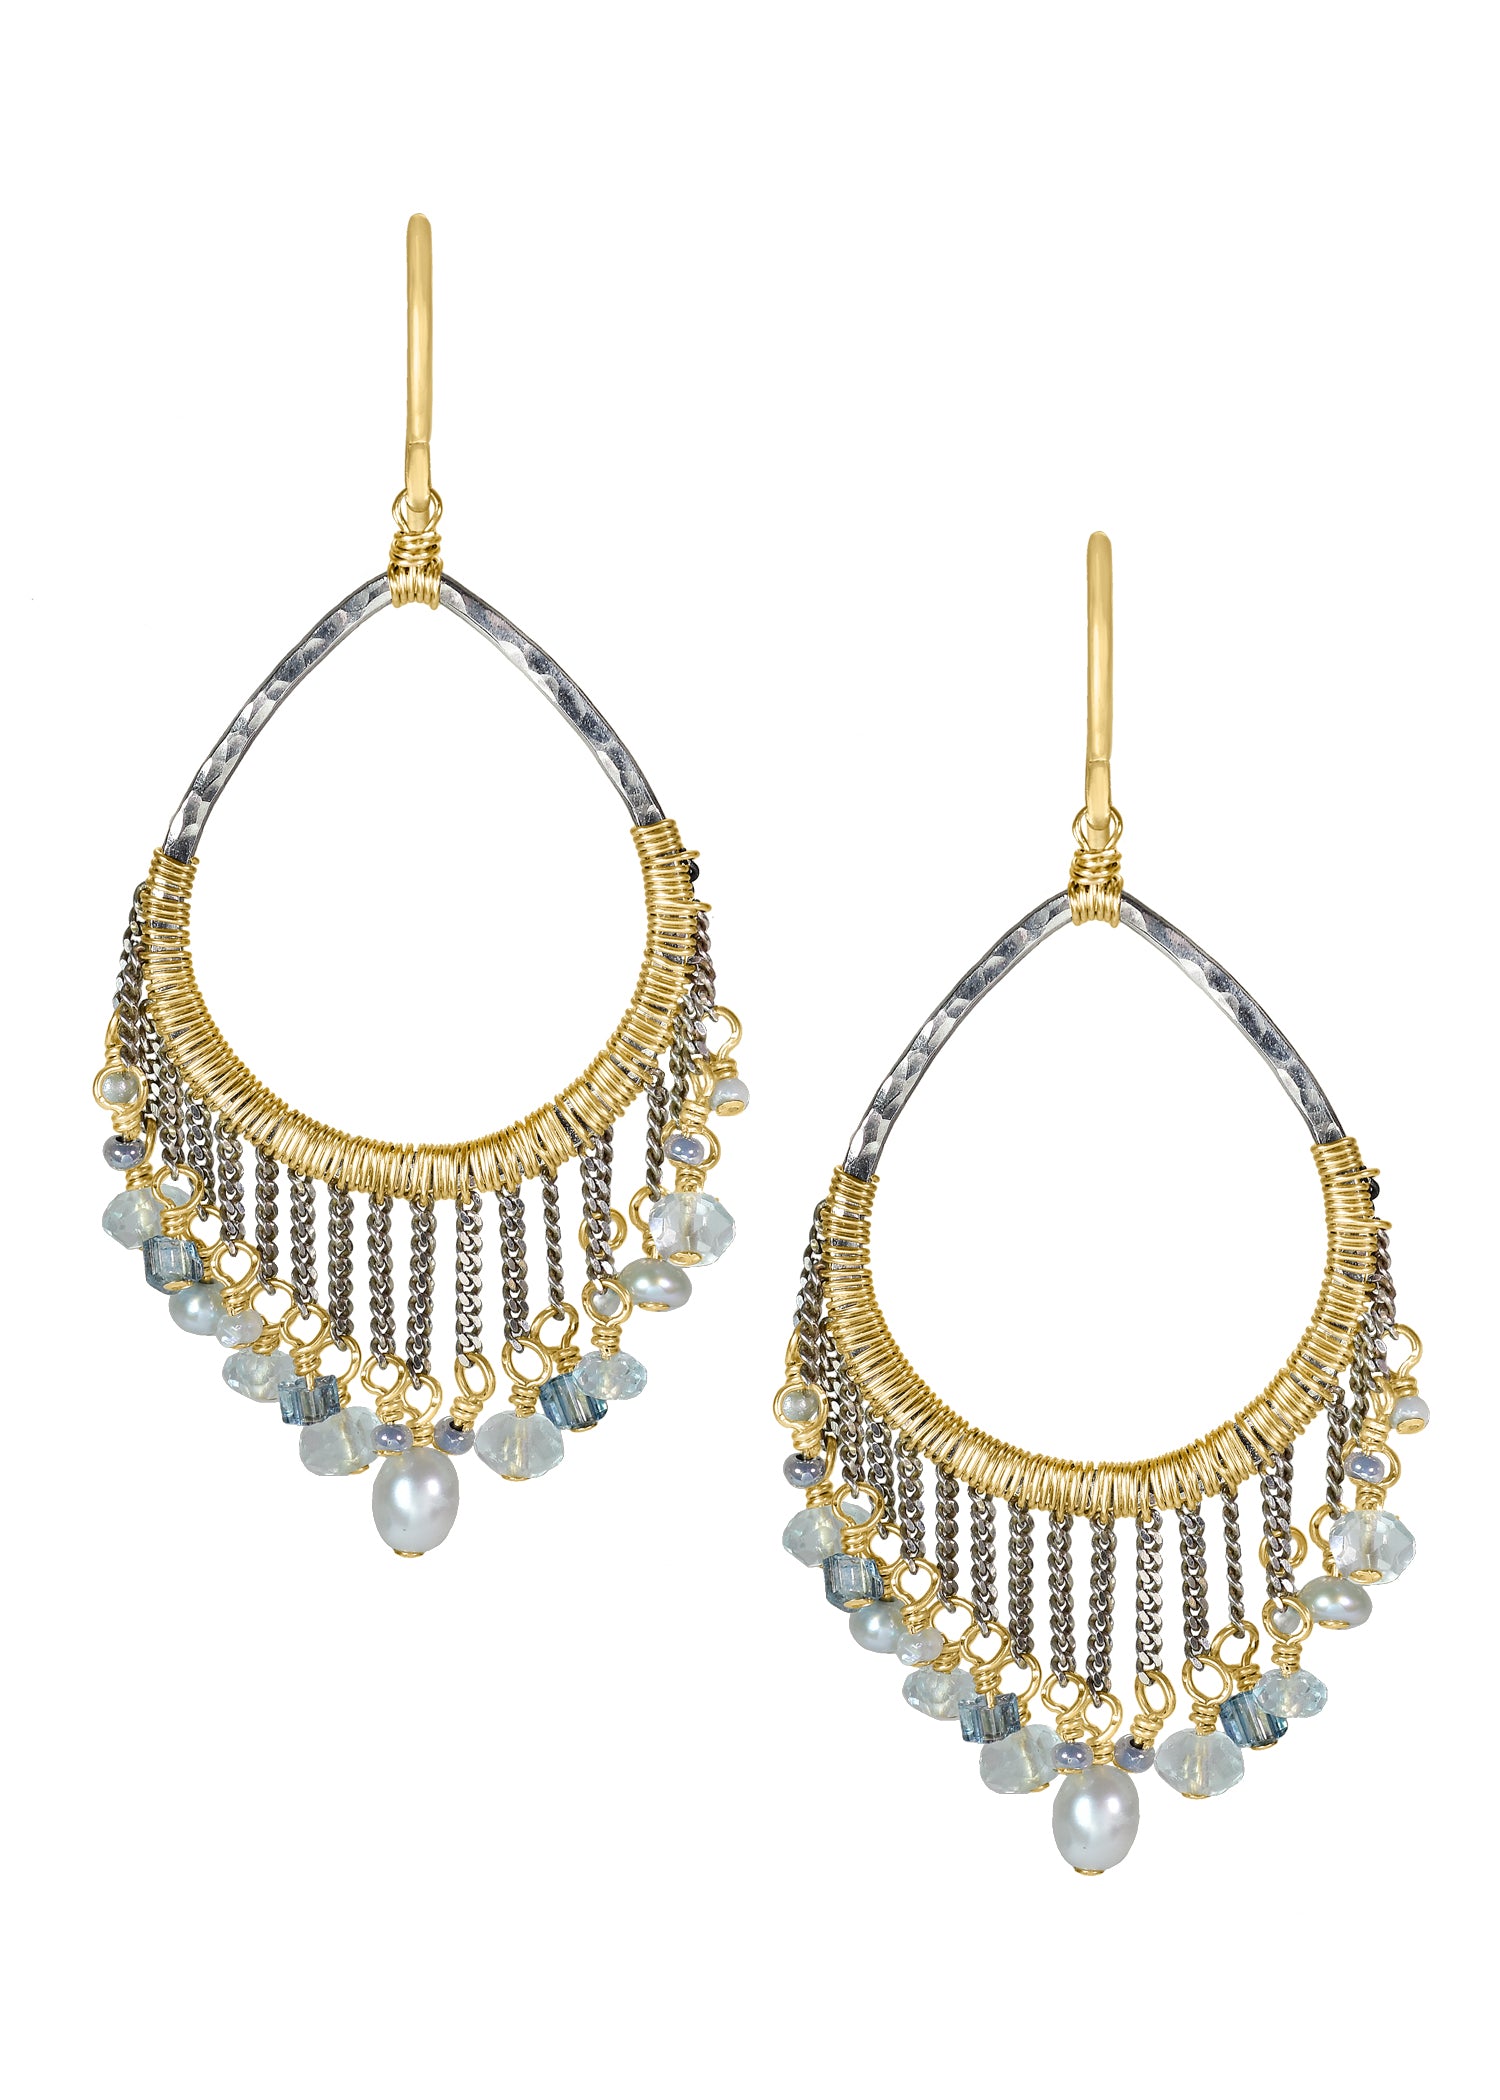 Freshwater pearl Aquamarine Seed beads 14k gold fill Sterling silver Mixed metal Earrings measure 2" in length (including the ear wires) and 1-1/8" in width at the widest point Handmade in our Los Angeles studio